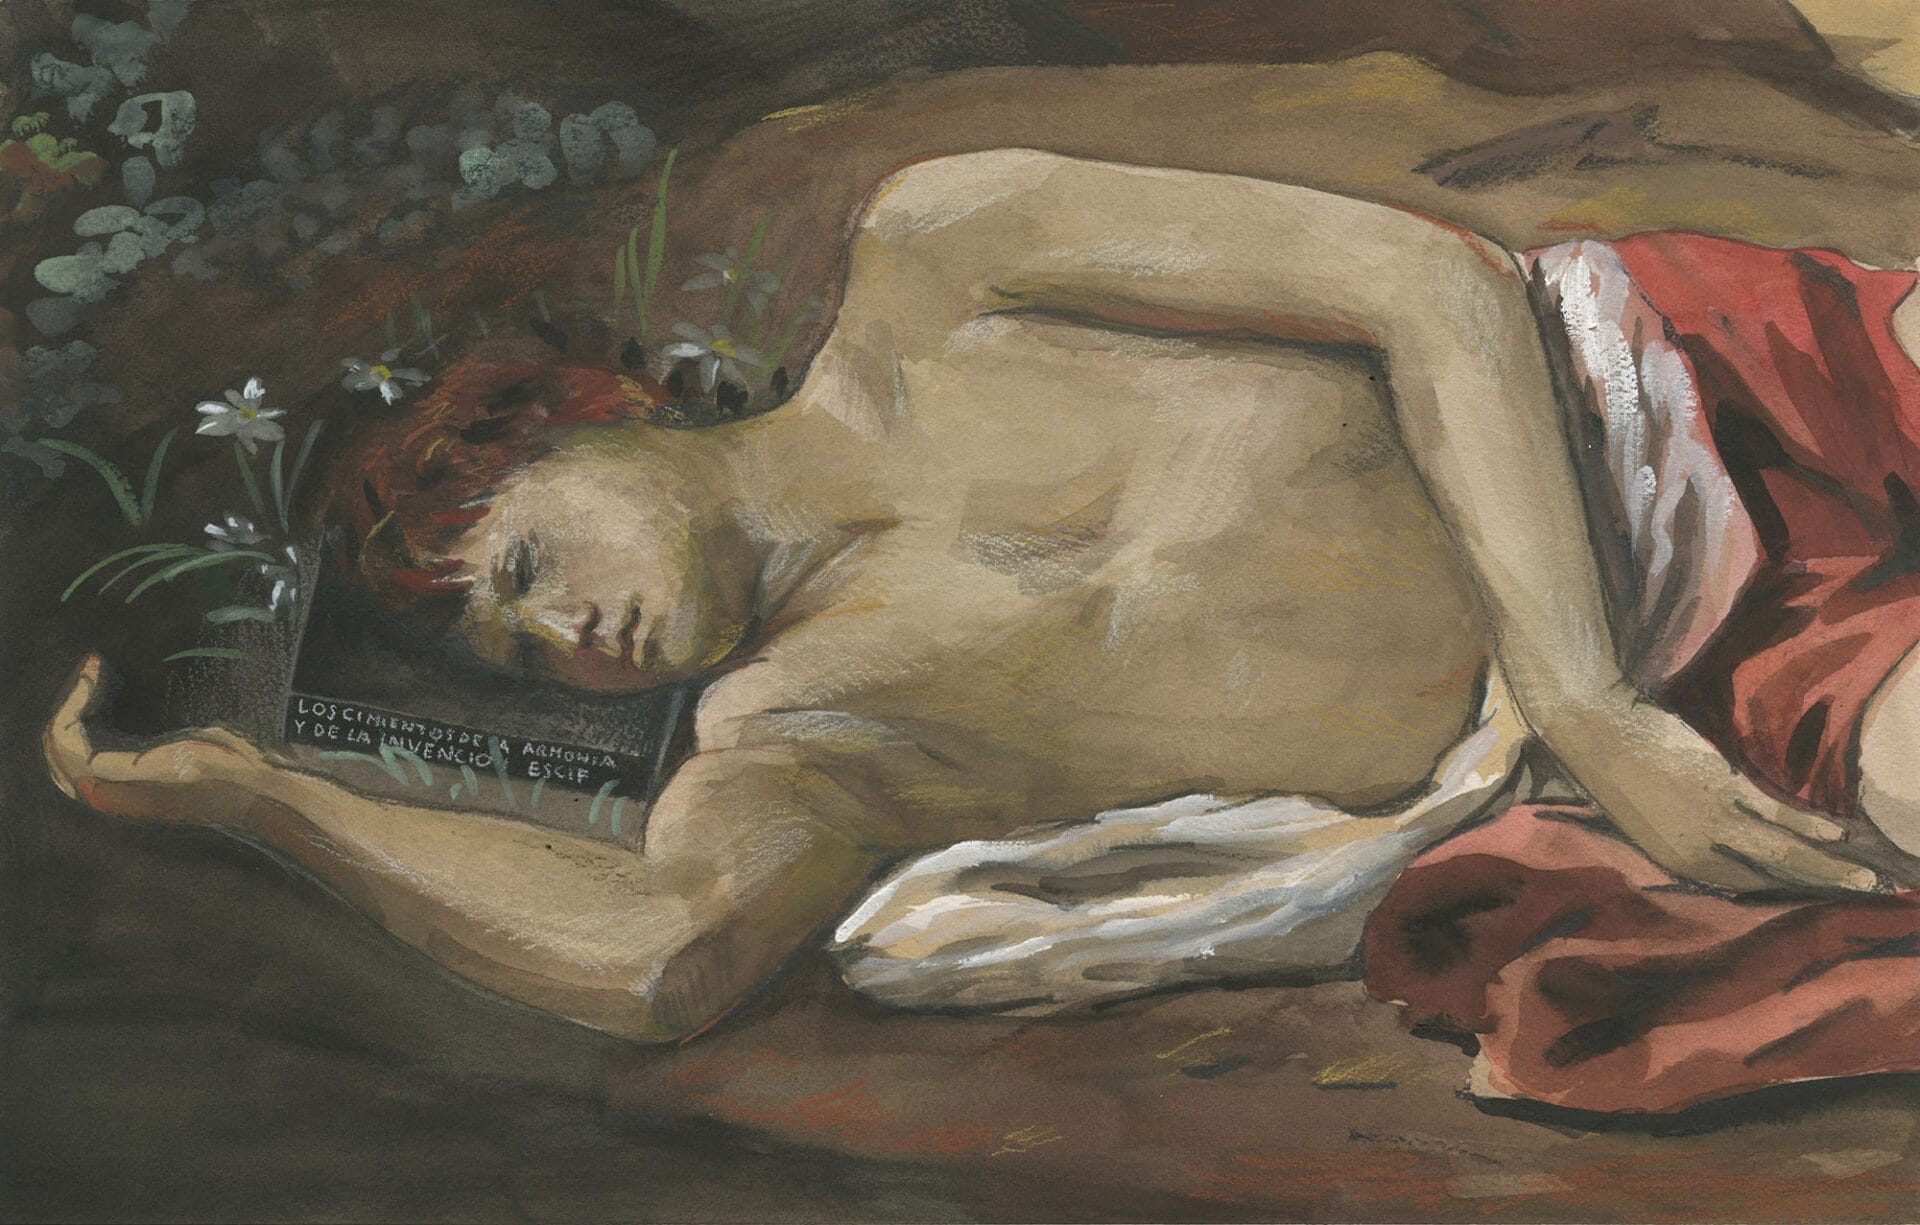 a horizontal watercolor painting of a young man partially wrapped ina robe, taking a nap on the ground and using a book as a pillow